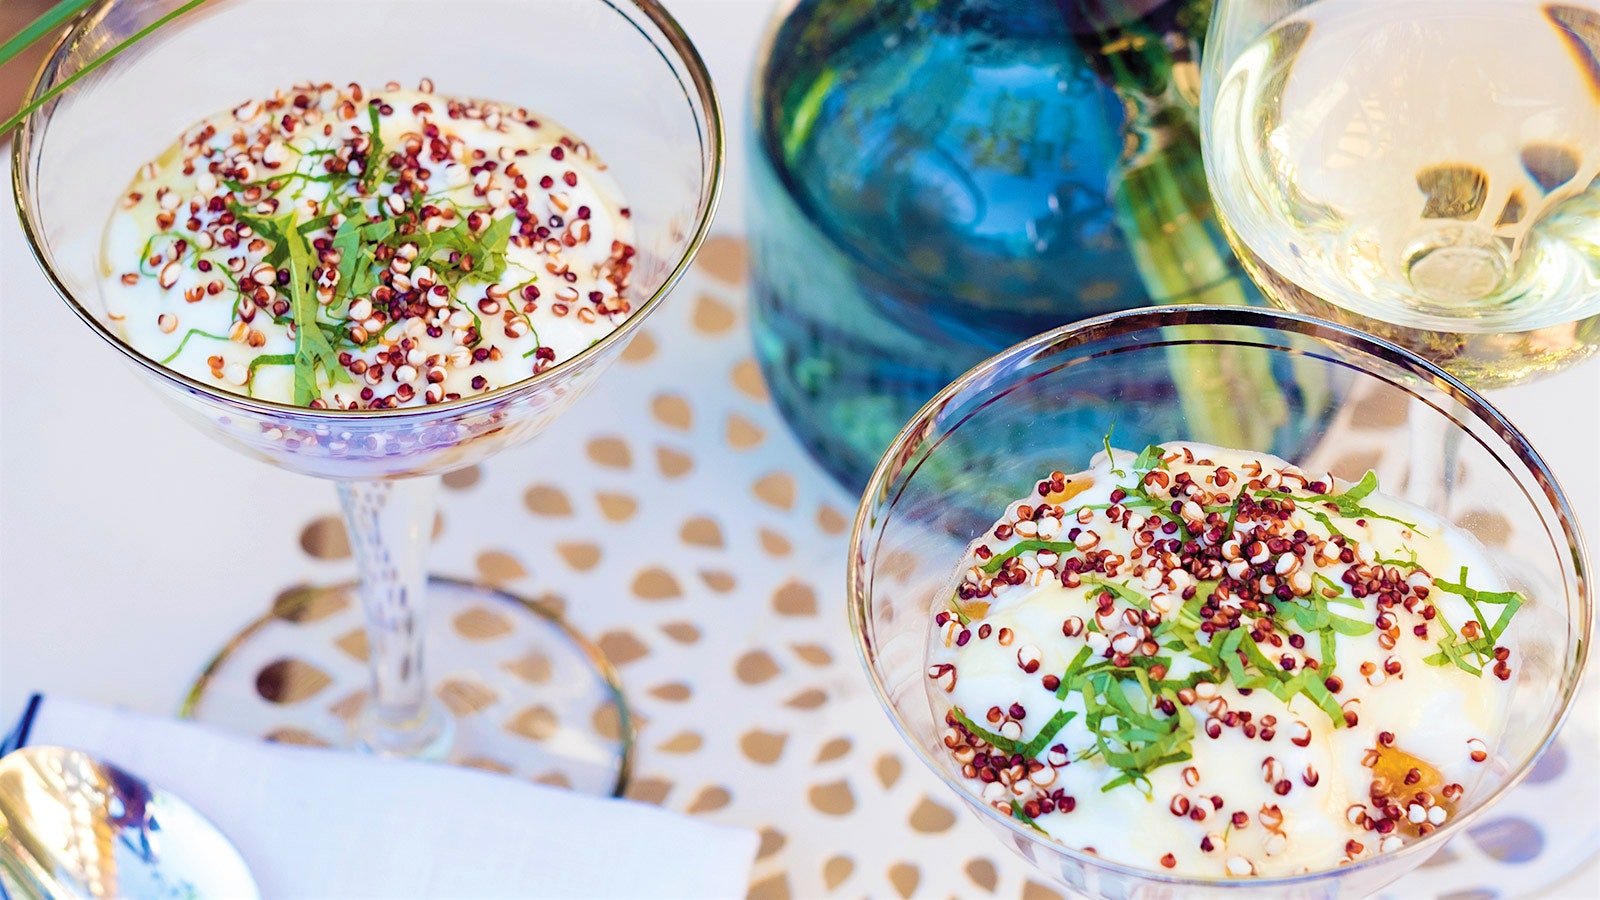  Martini glasses holding a dessert of yogurt and grilled peaches topped with puffed quinoa